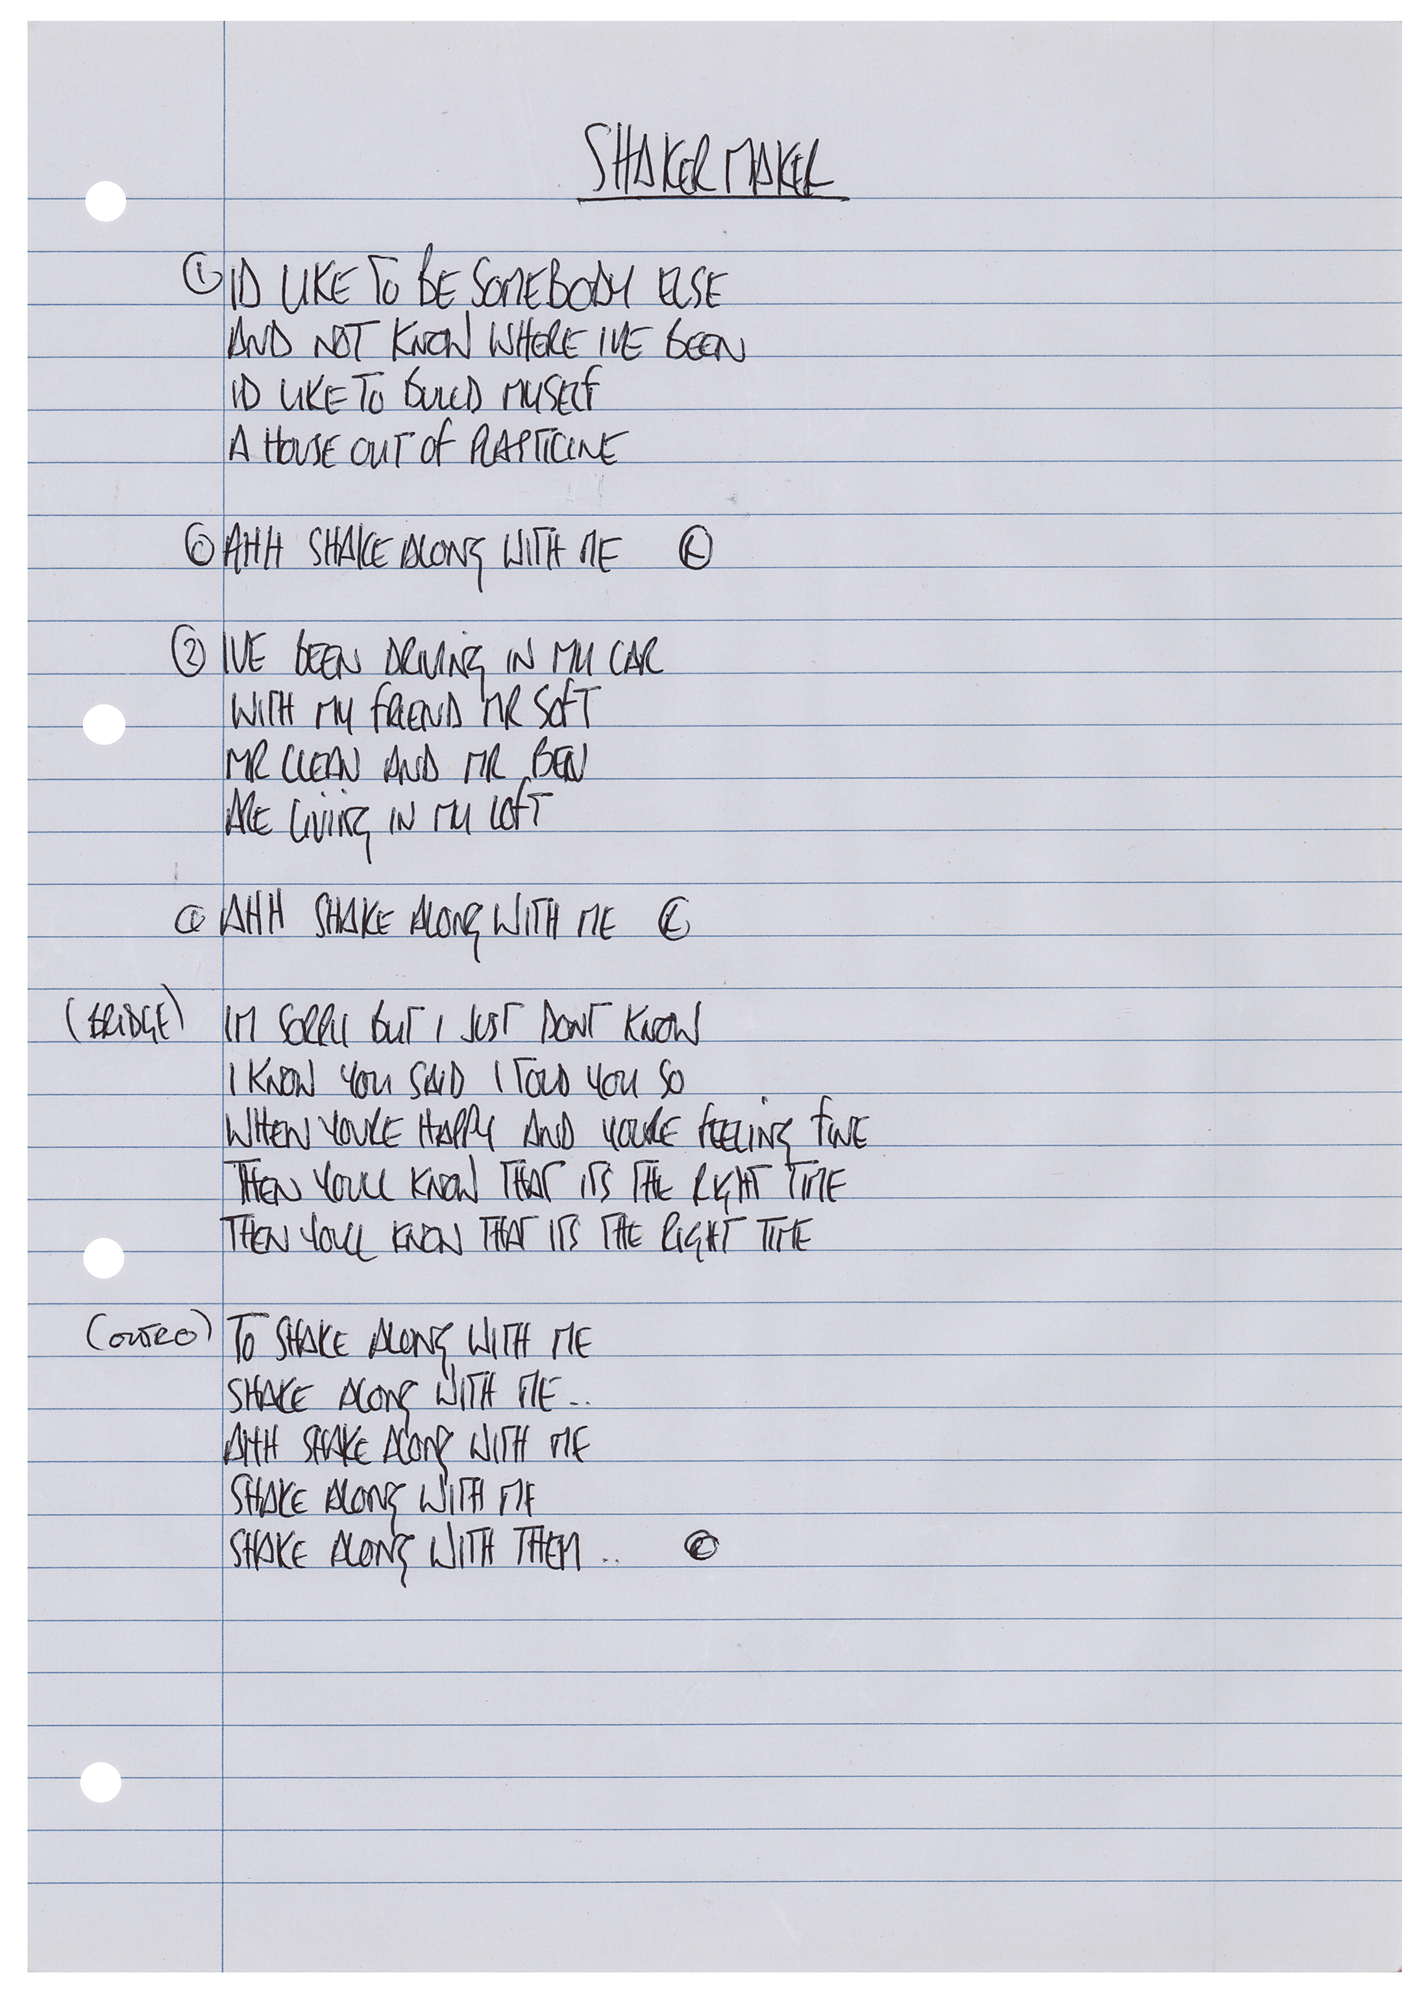 Lot #628 Oasis: Noel Gallagher Handwritten Lyrics (13) for Definitely Maybe, with CD Signed by the Gallagher Brothers - Image 8